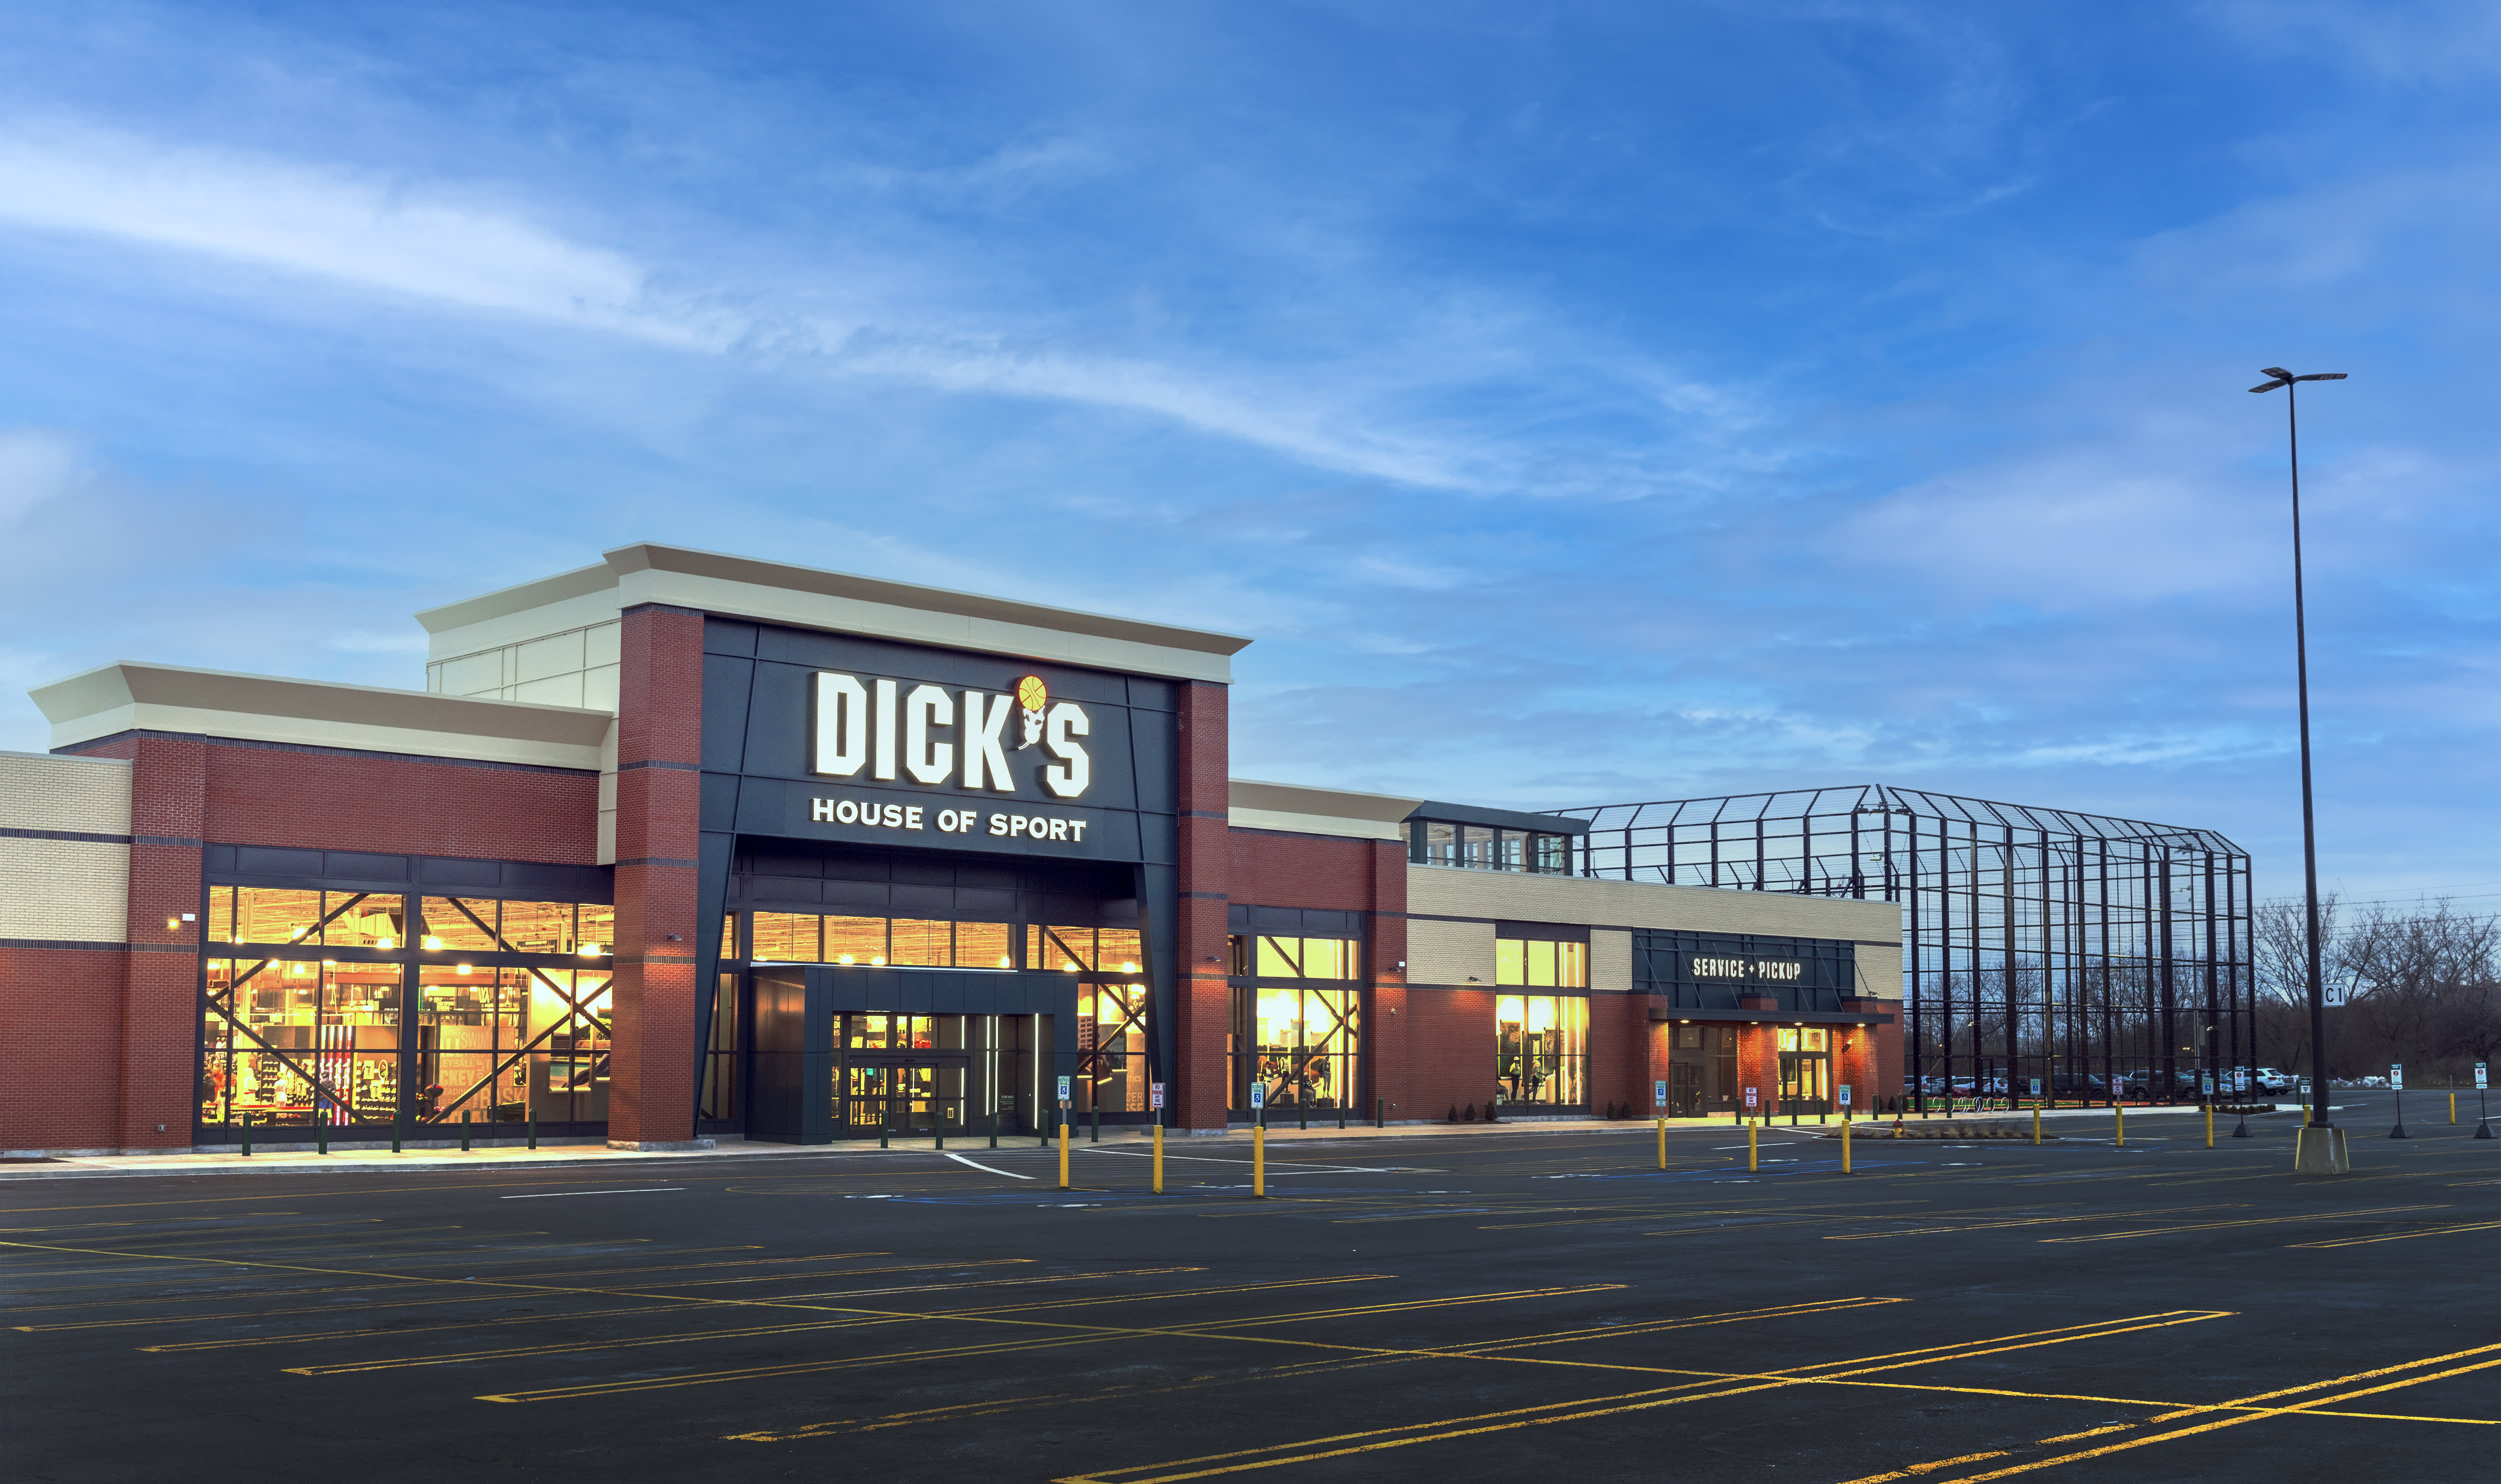 Dick’s Sporting Goods’ new store has a running track and outdoor track